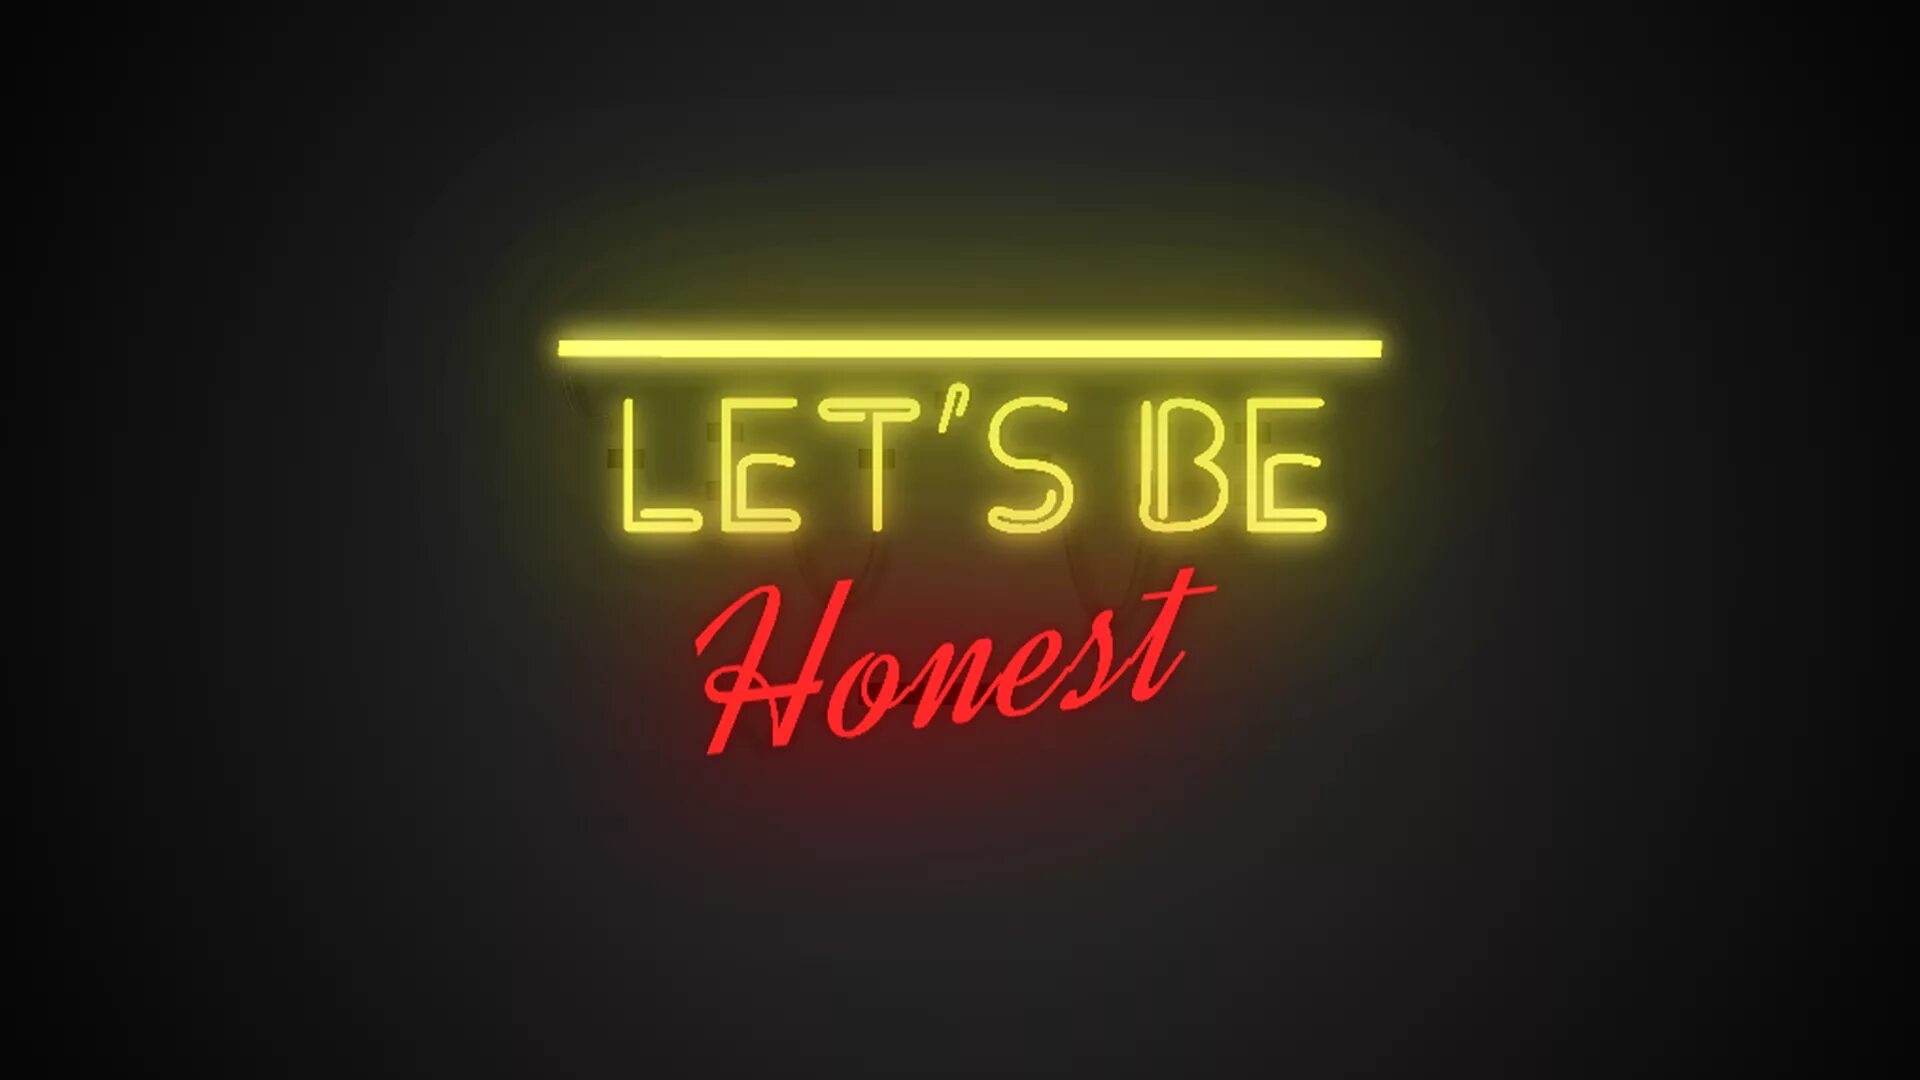 Let him play. Let картинка. Надпись honesty. Lets. Honest картинки.